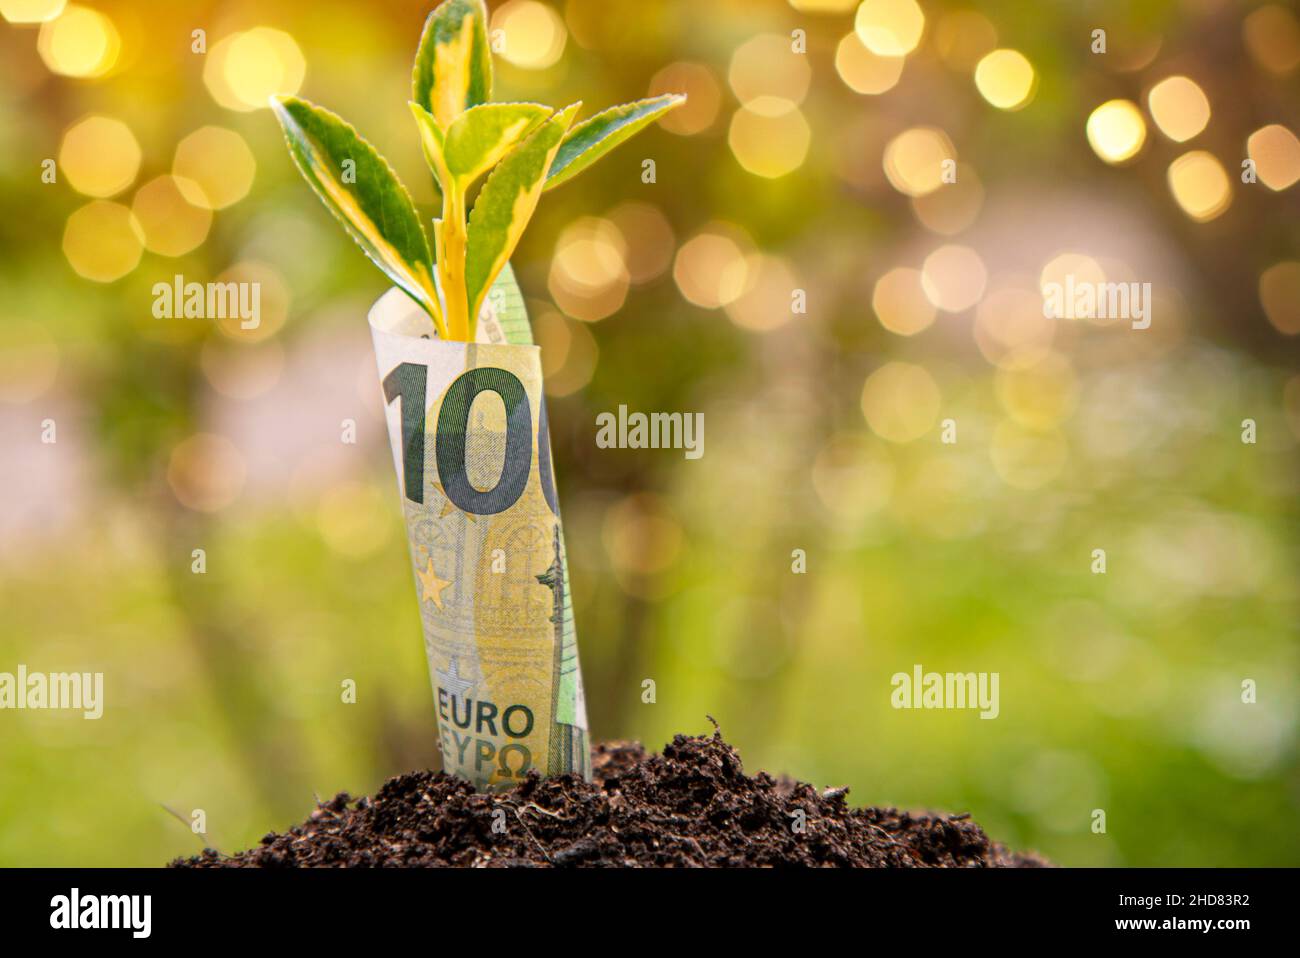 Economic Growth symbol : one hundred euro banknote with a plant or leaf growing out of the earth with green blurry background Stock Photo